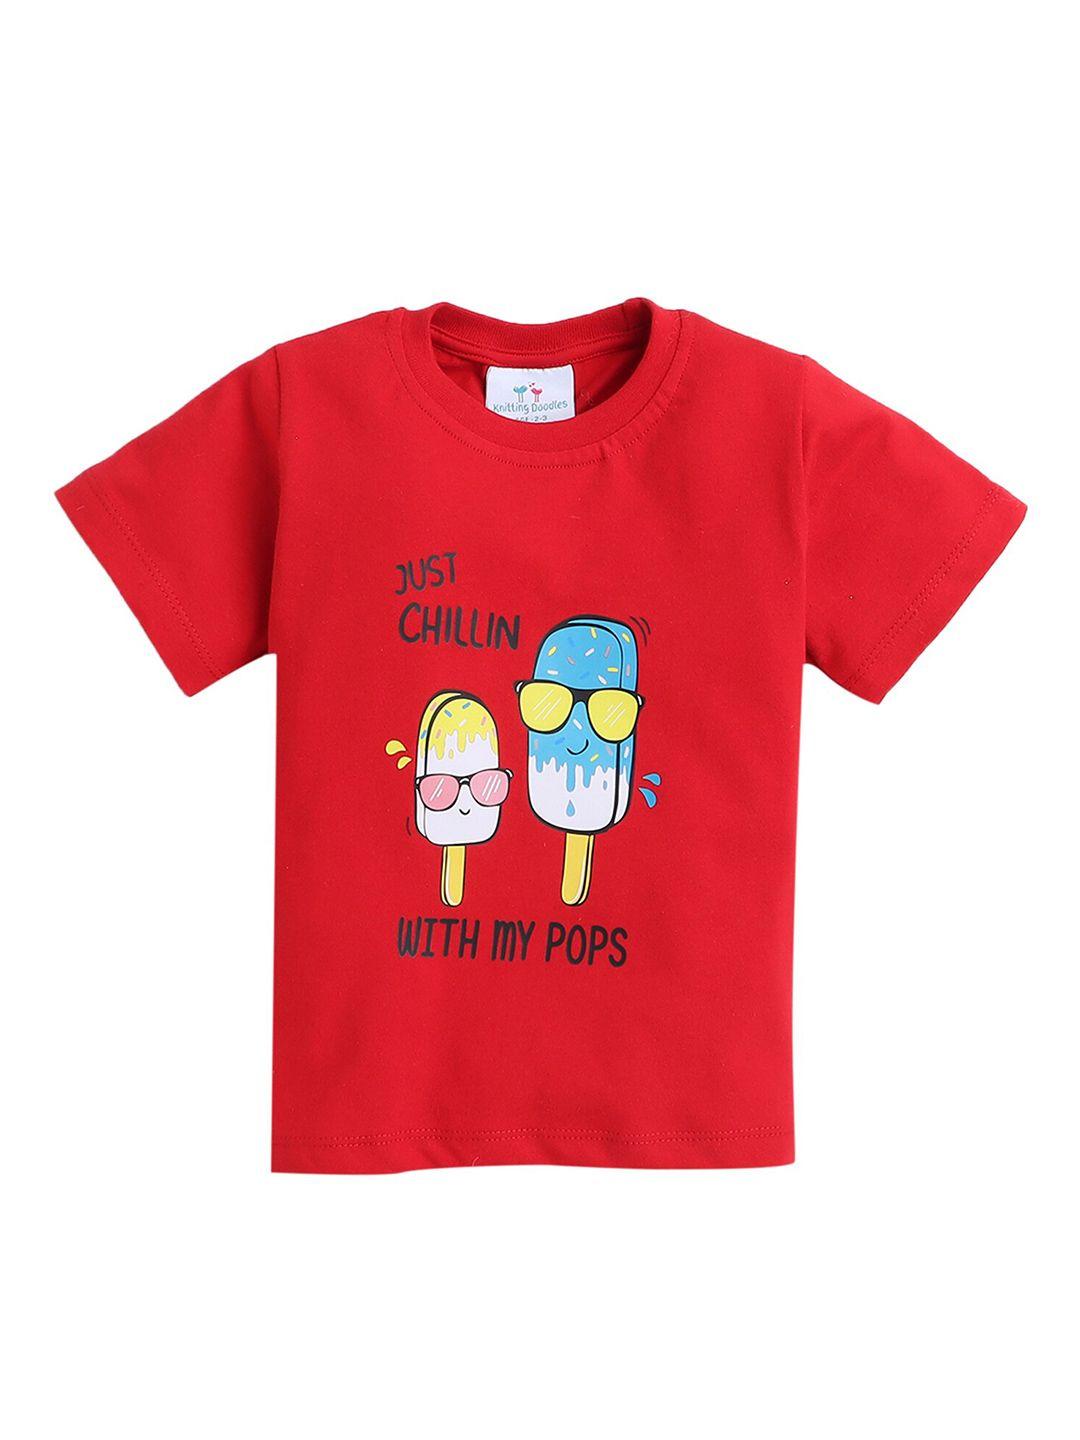 Knitting Doodles Boys Just Chilling Printed Round Neck Regular Fit Cotton T-Shirt